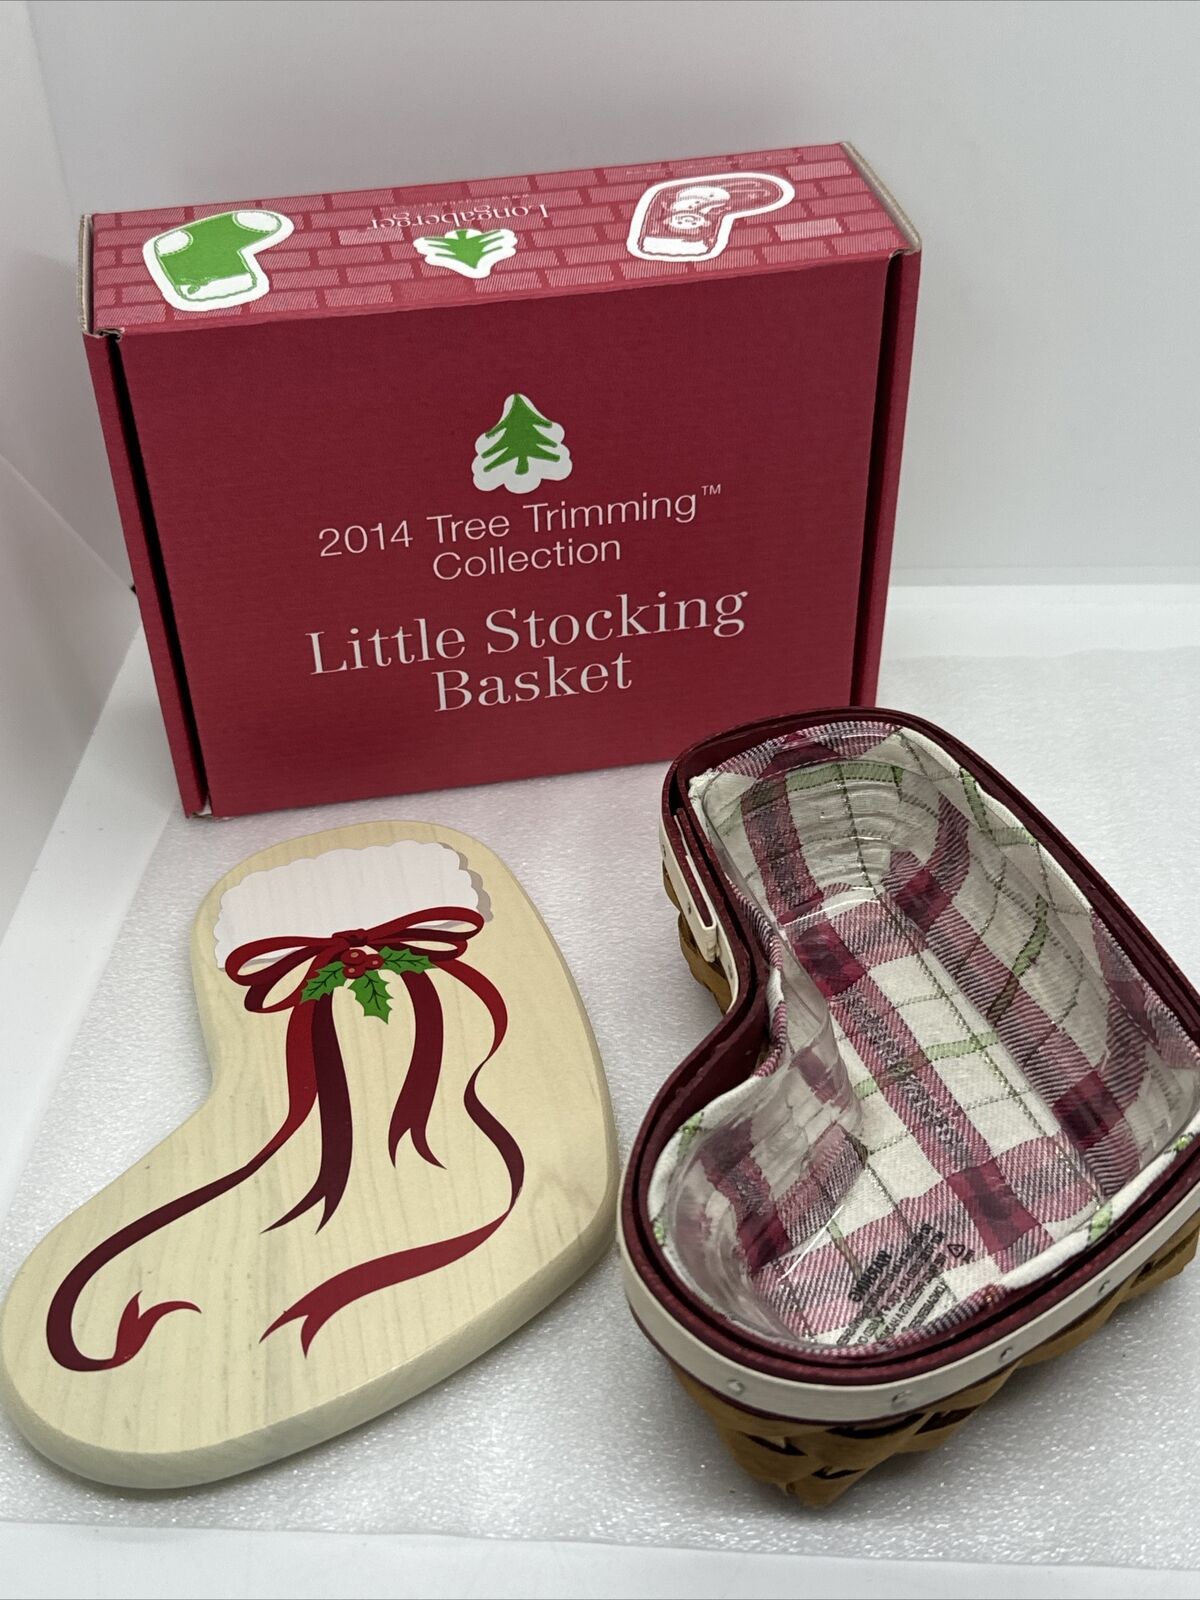 Longaberger 2014 Christmas Stocking Basket With Liner Lid Box Tie-on Protector